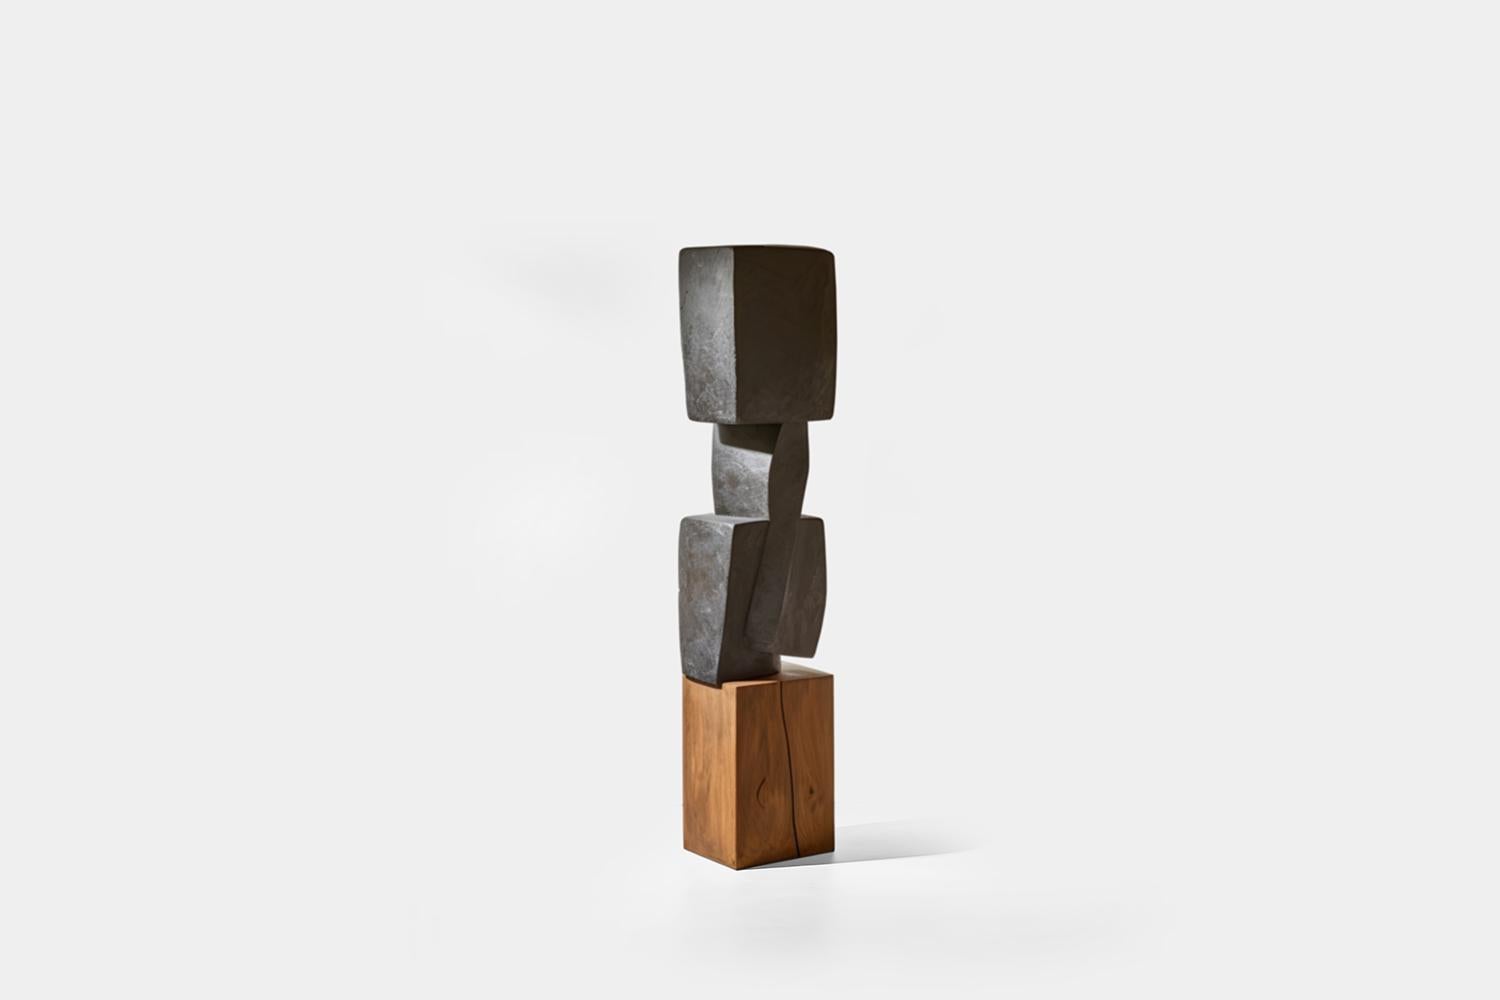 Mexican Biomorphic Carved Wood Sculpture in the style of Isamu Noguchi, Unseen Force 18 For Sale